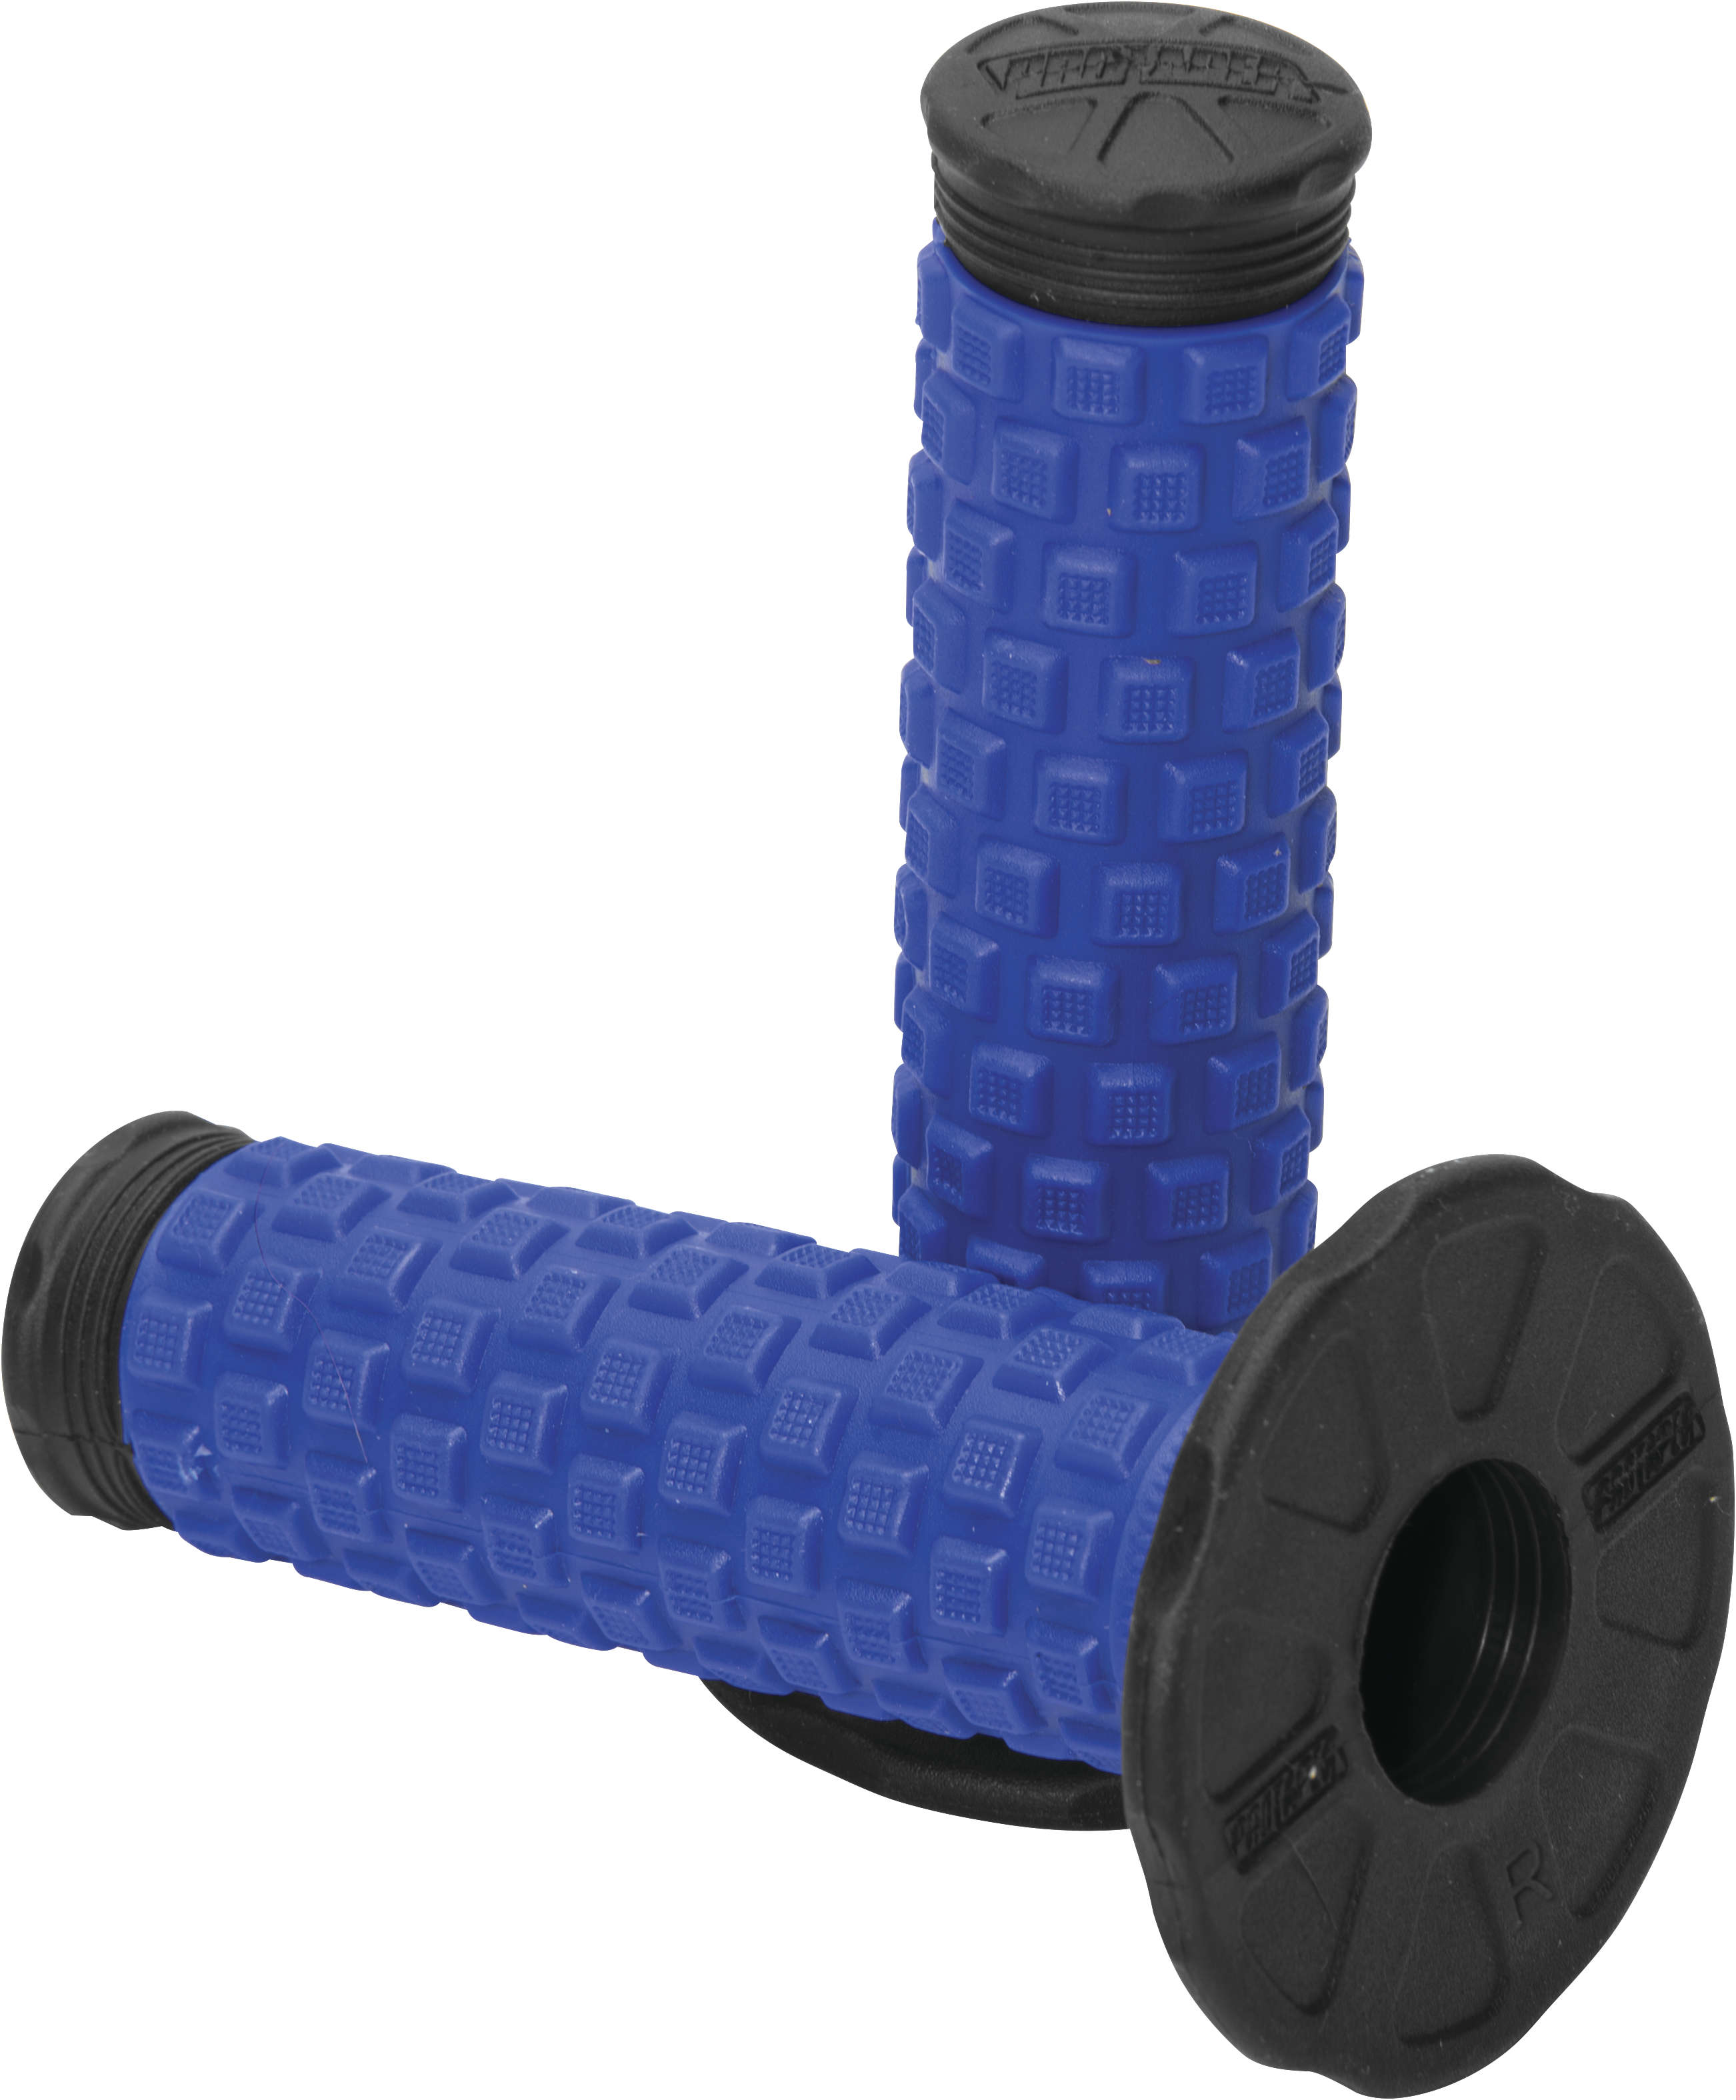 Pillow Top Motorcycle Grips - Blue & Black - For 7/8" Bars w/ Twist Throttle - Click Image to Close